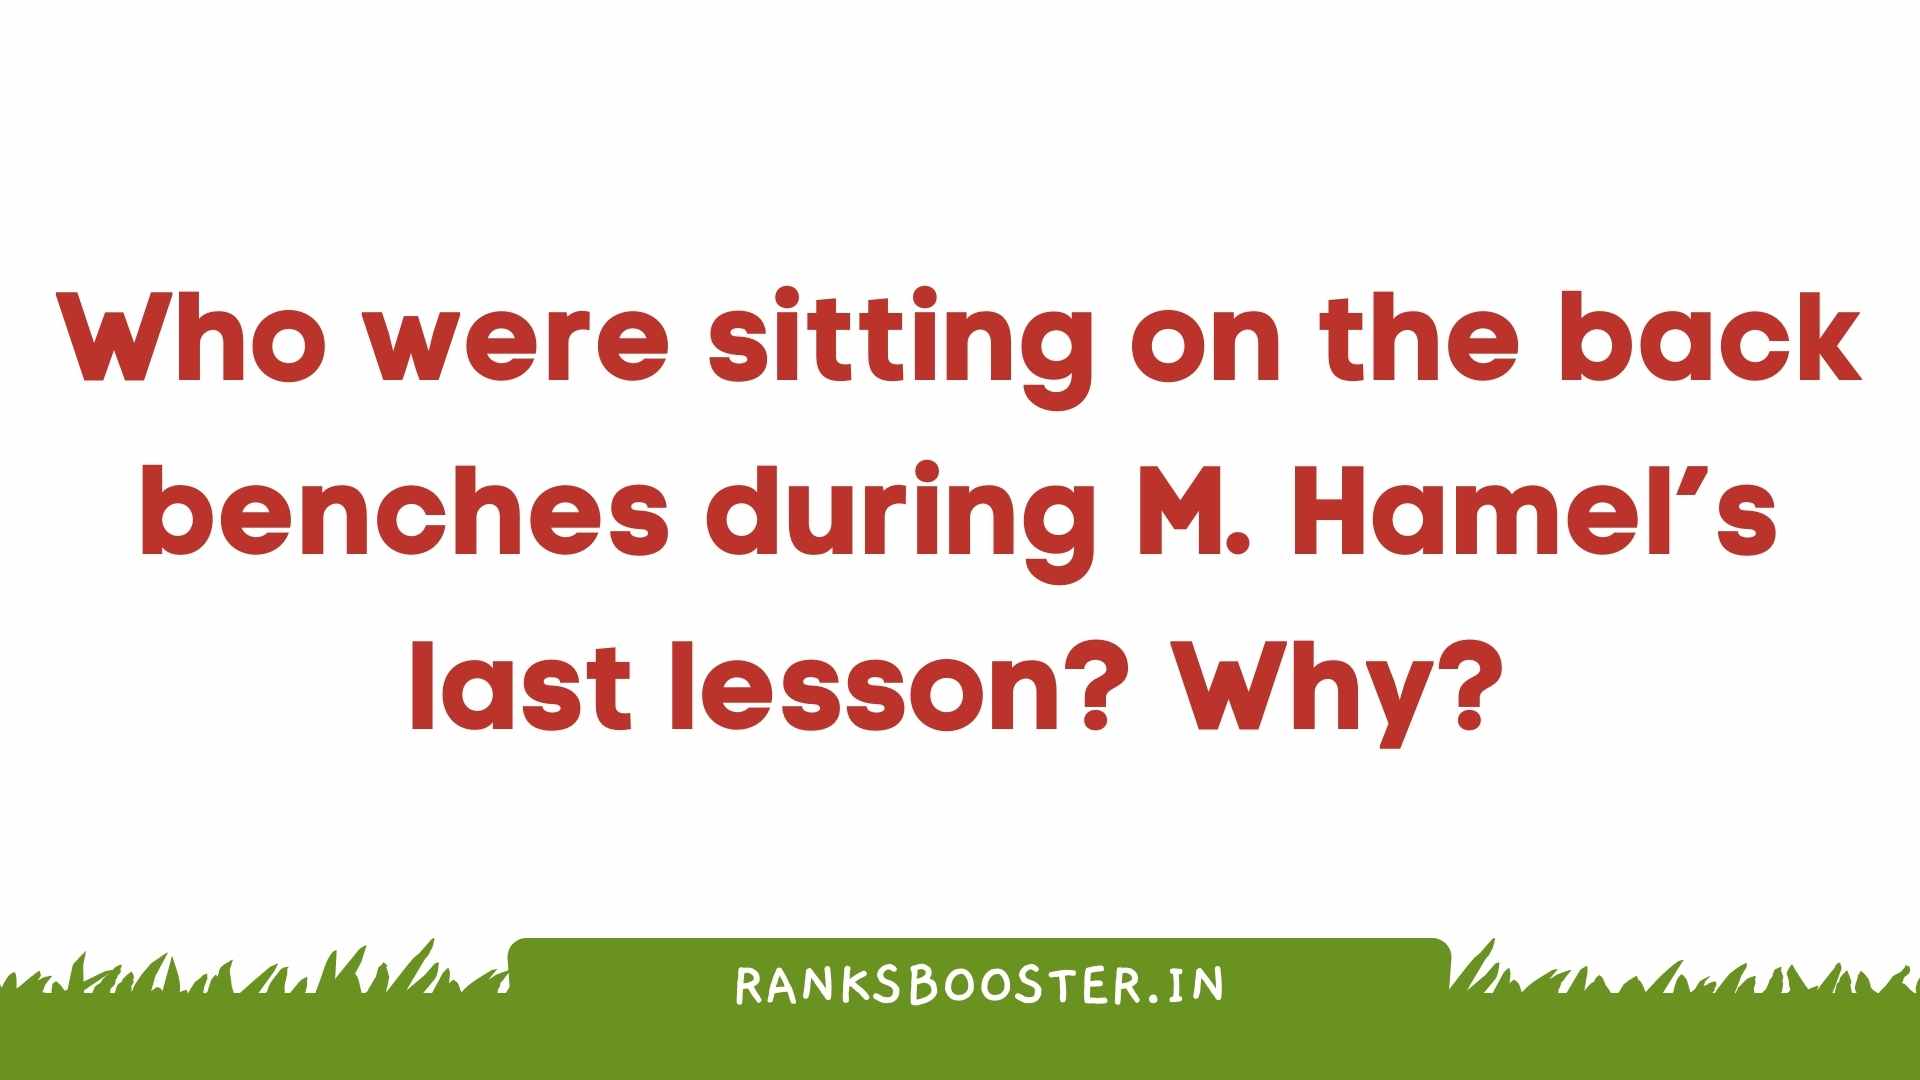 Who were sitting on the back benches during M. Hamel’s last lesson? Why?